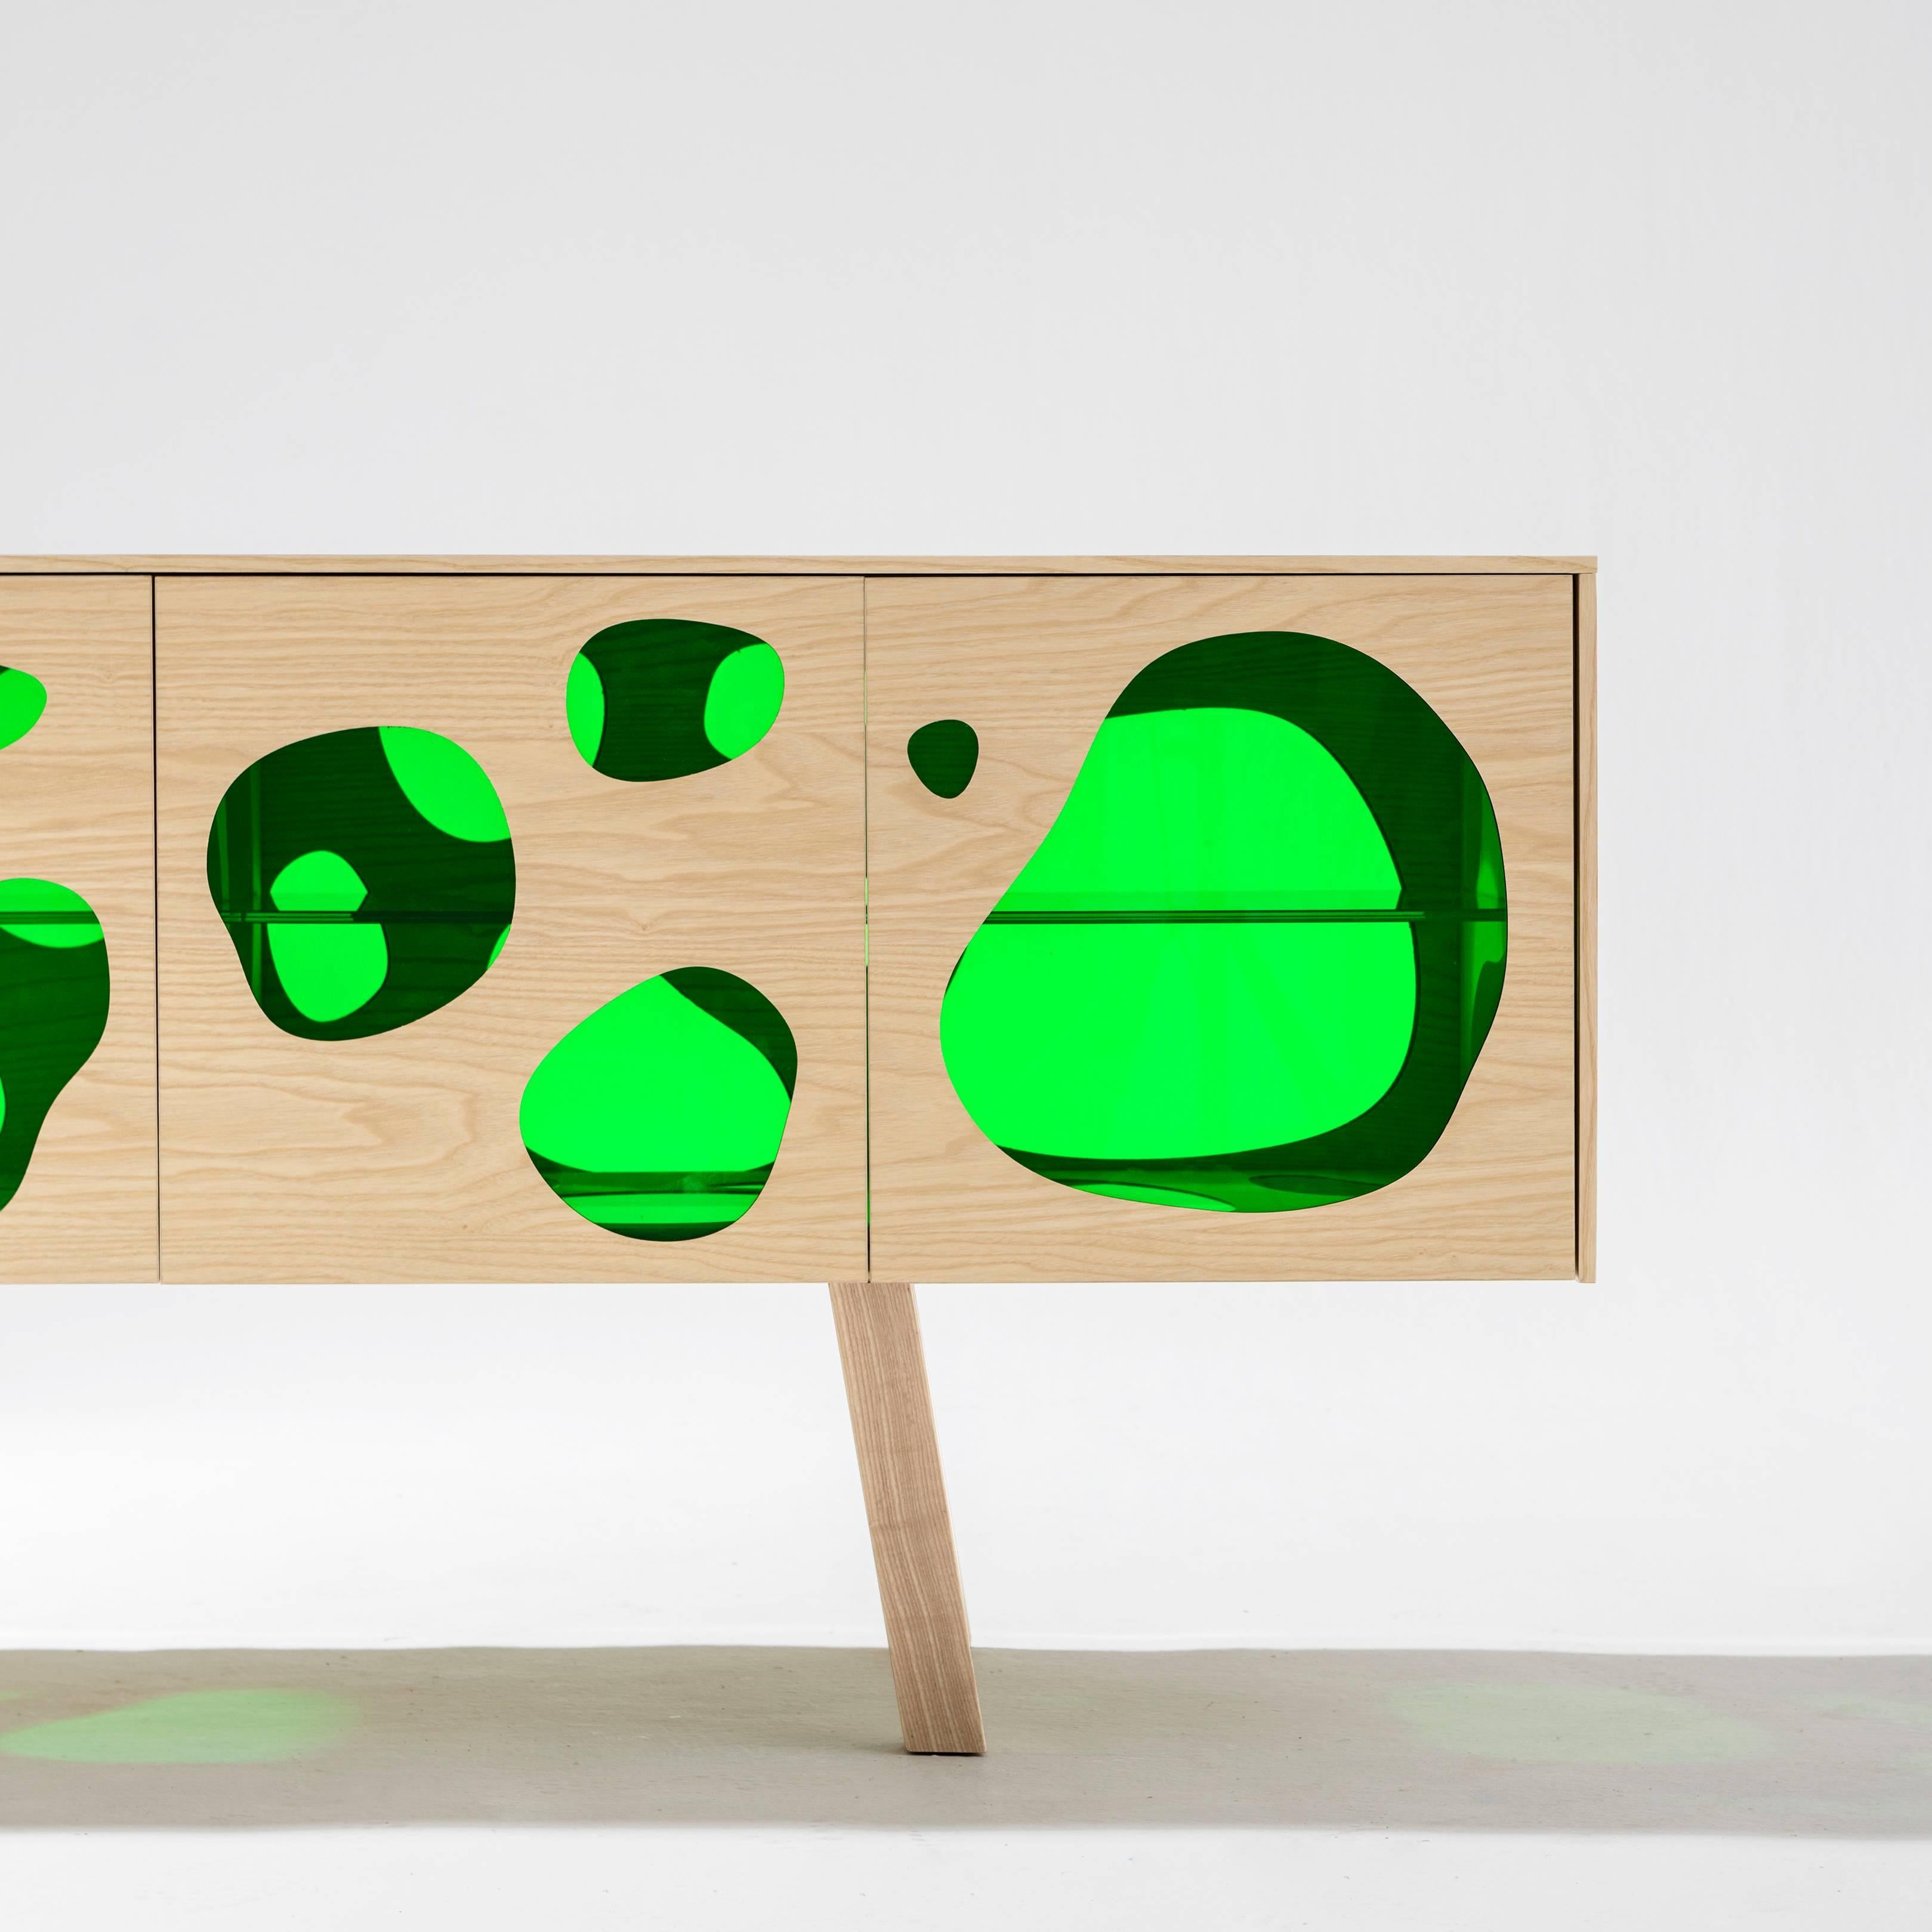 Sideboard designed by Fernando and Humberto Campana in 2016.
Manufactured in Spain.

The Campana brothers chose the coloured glass to give the impression of a fish tank. The cuboid Aquário buffet is built from either ash or pine wood, with